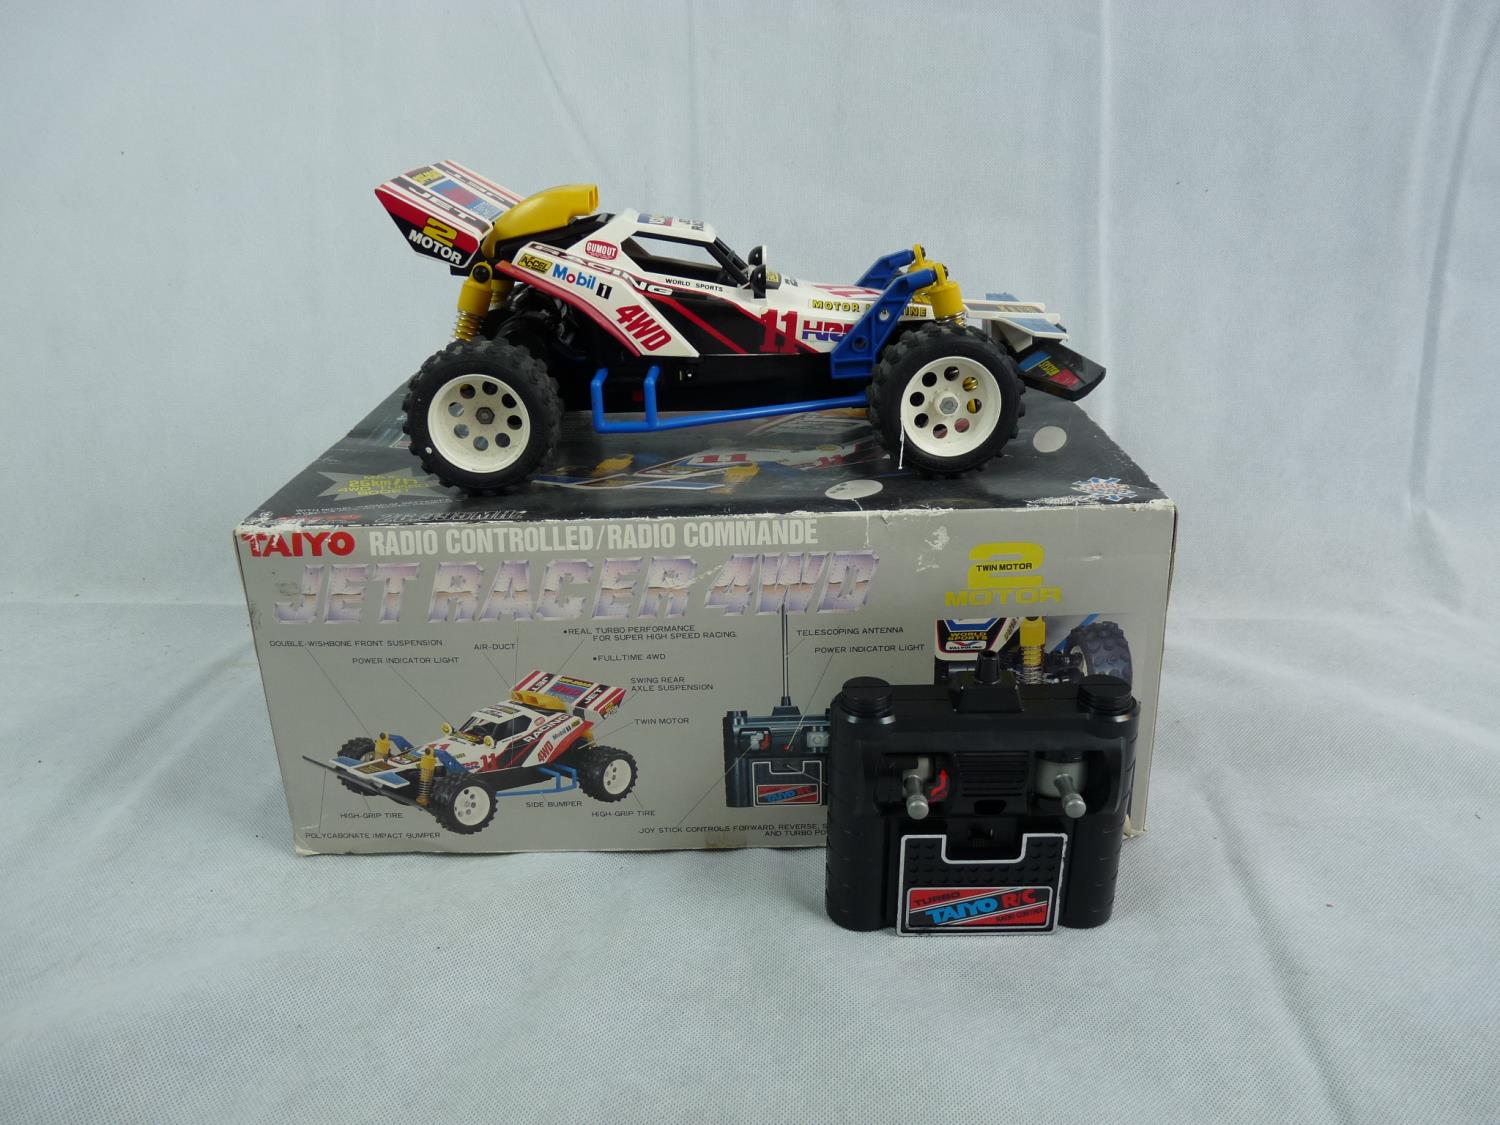 Boxed Taiyo Radio Controlled Jet Racer 4WD